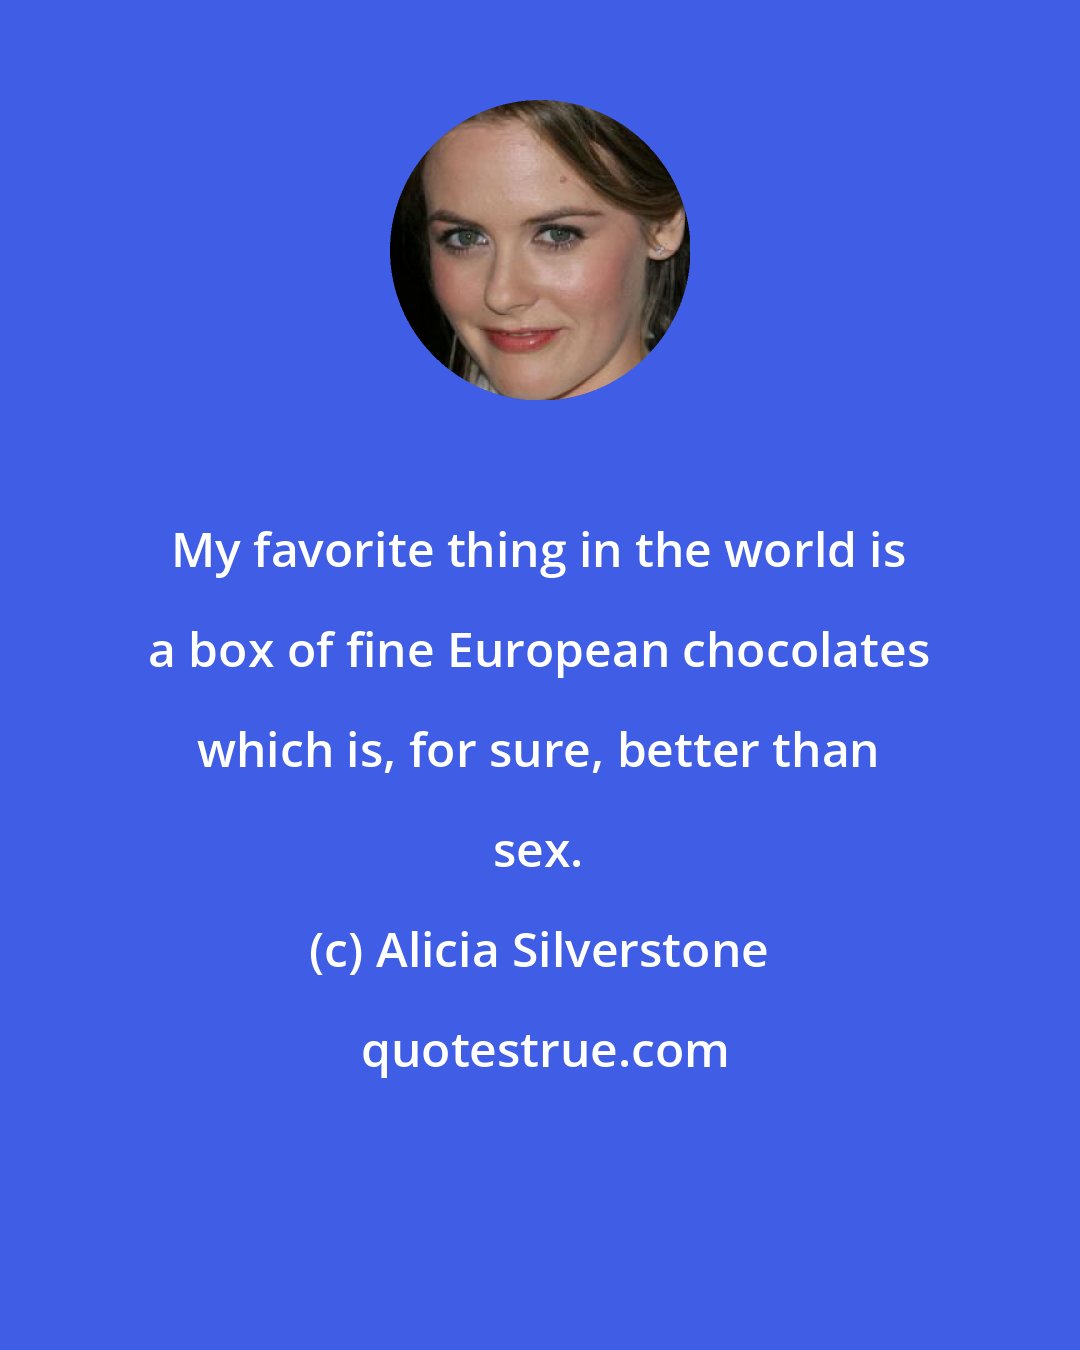 Alicia Silverstone: My favorite thing in the world is a box of fine European chocolates which is, for sure, better than sex.